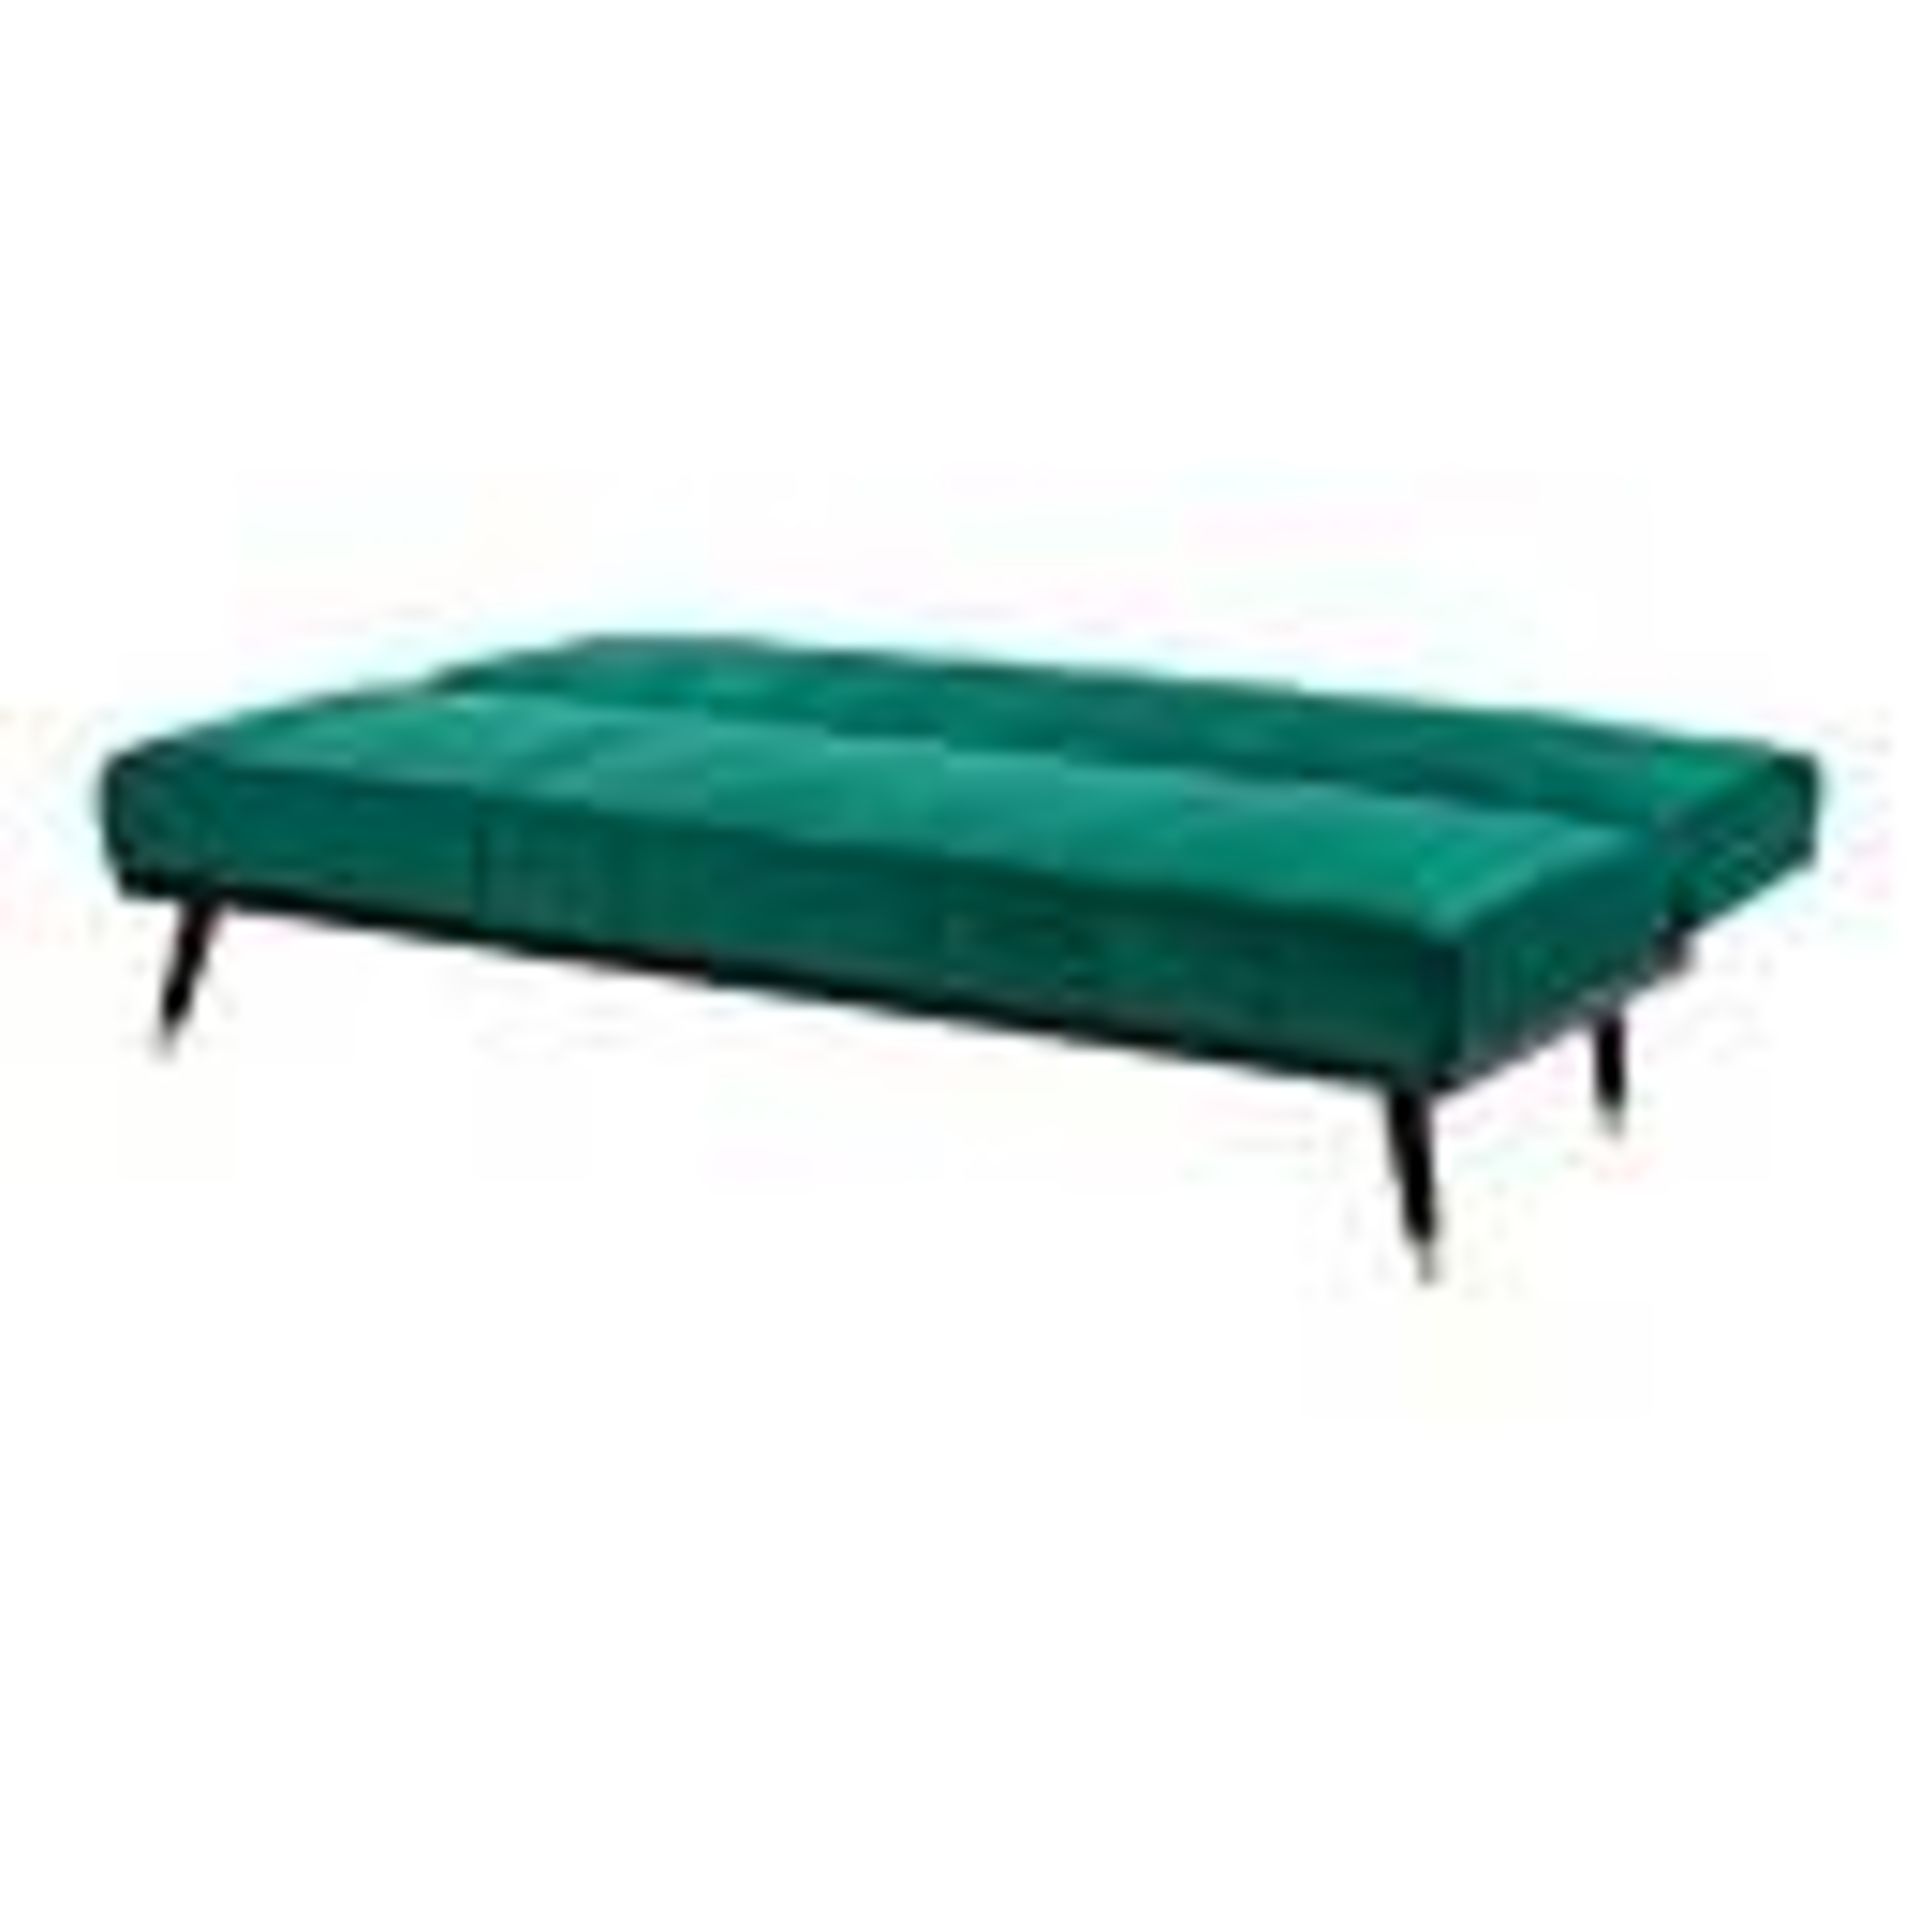 (P4) 1x Sindy Sofa Bed Deco Luxe Emerald Green RRP £250. (Sofa: H82x W181x D83cm). (Bed: H40x W181x - Image 2 of 9